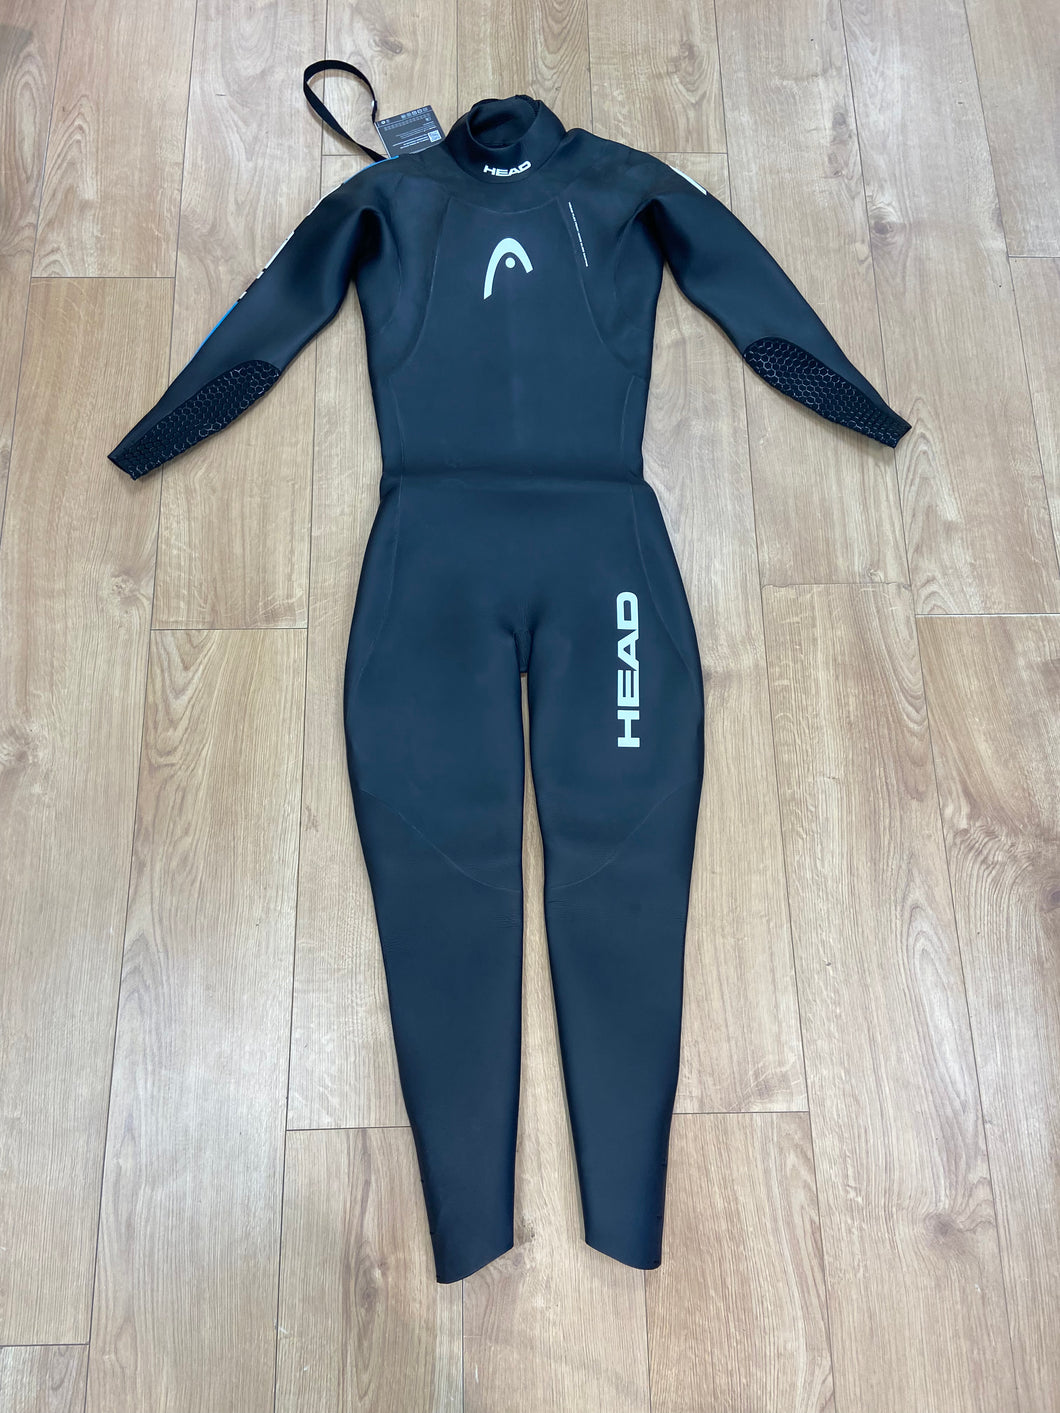 Clearance HEAD Swimming Tri Comp 3.2.2 Mens Wetsuit MLO (58)